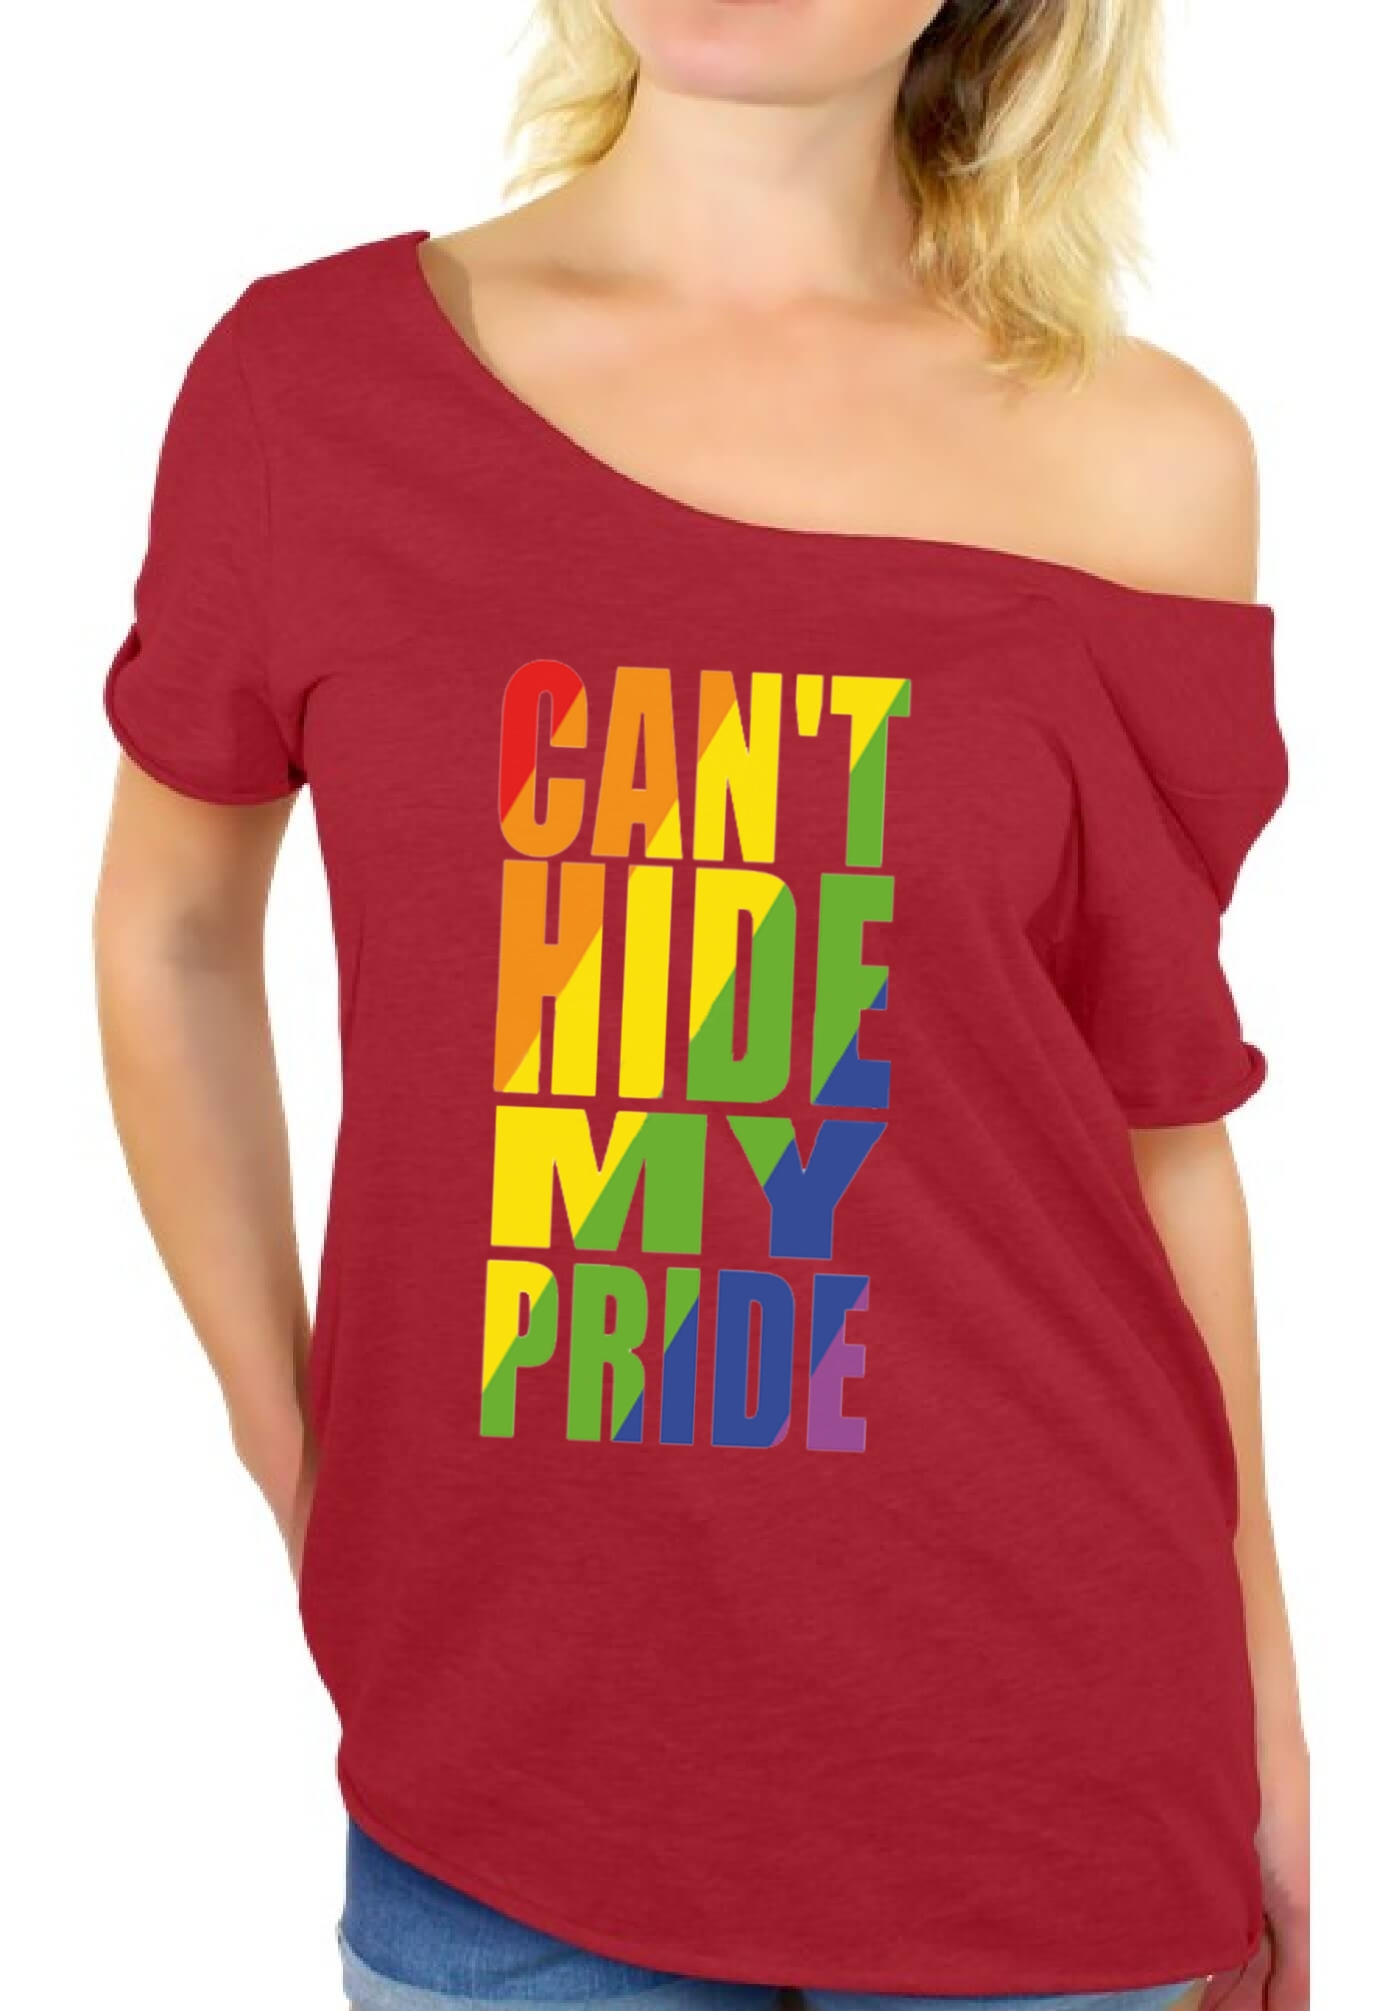 Women's LGBT Pride Off The Shoulder Tops T shirts Gay Parade Can't Hide